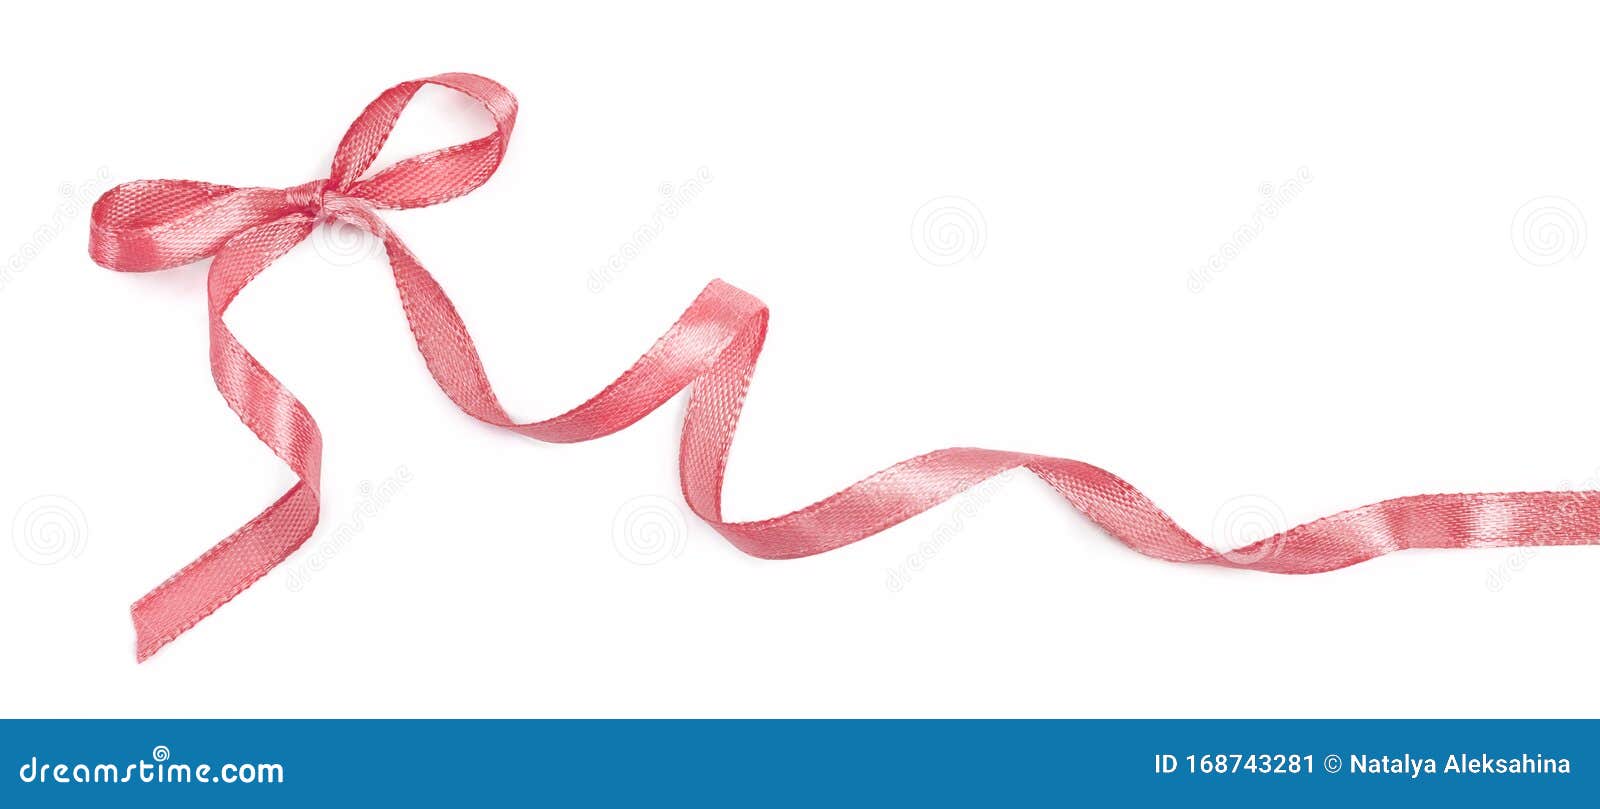 Thin Pink Ribbon: Over 1,425 Royalty-Free Licensable Stock Illustrations &  Drawings